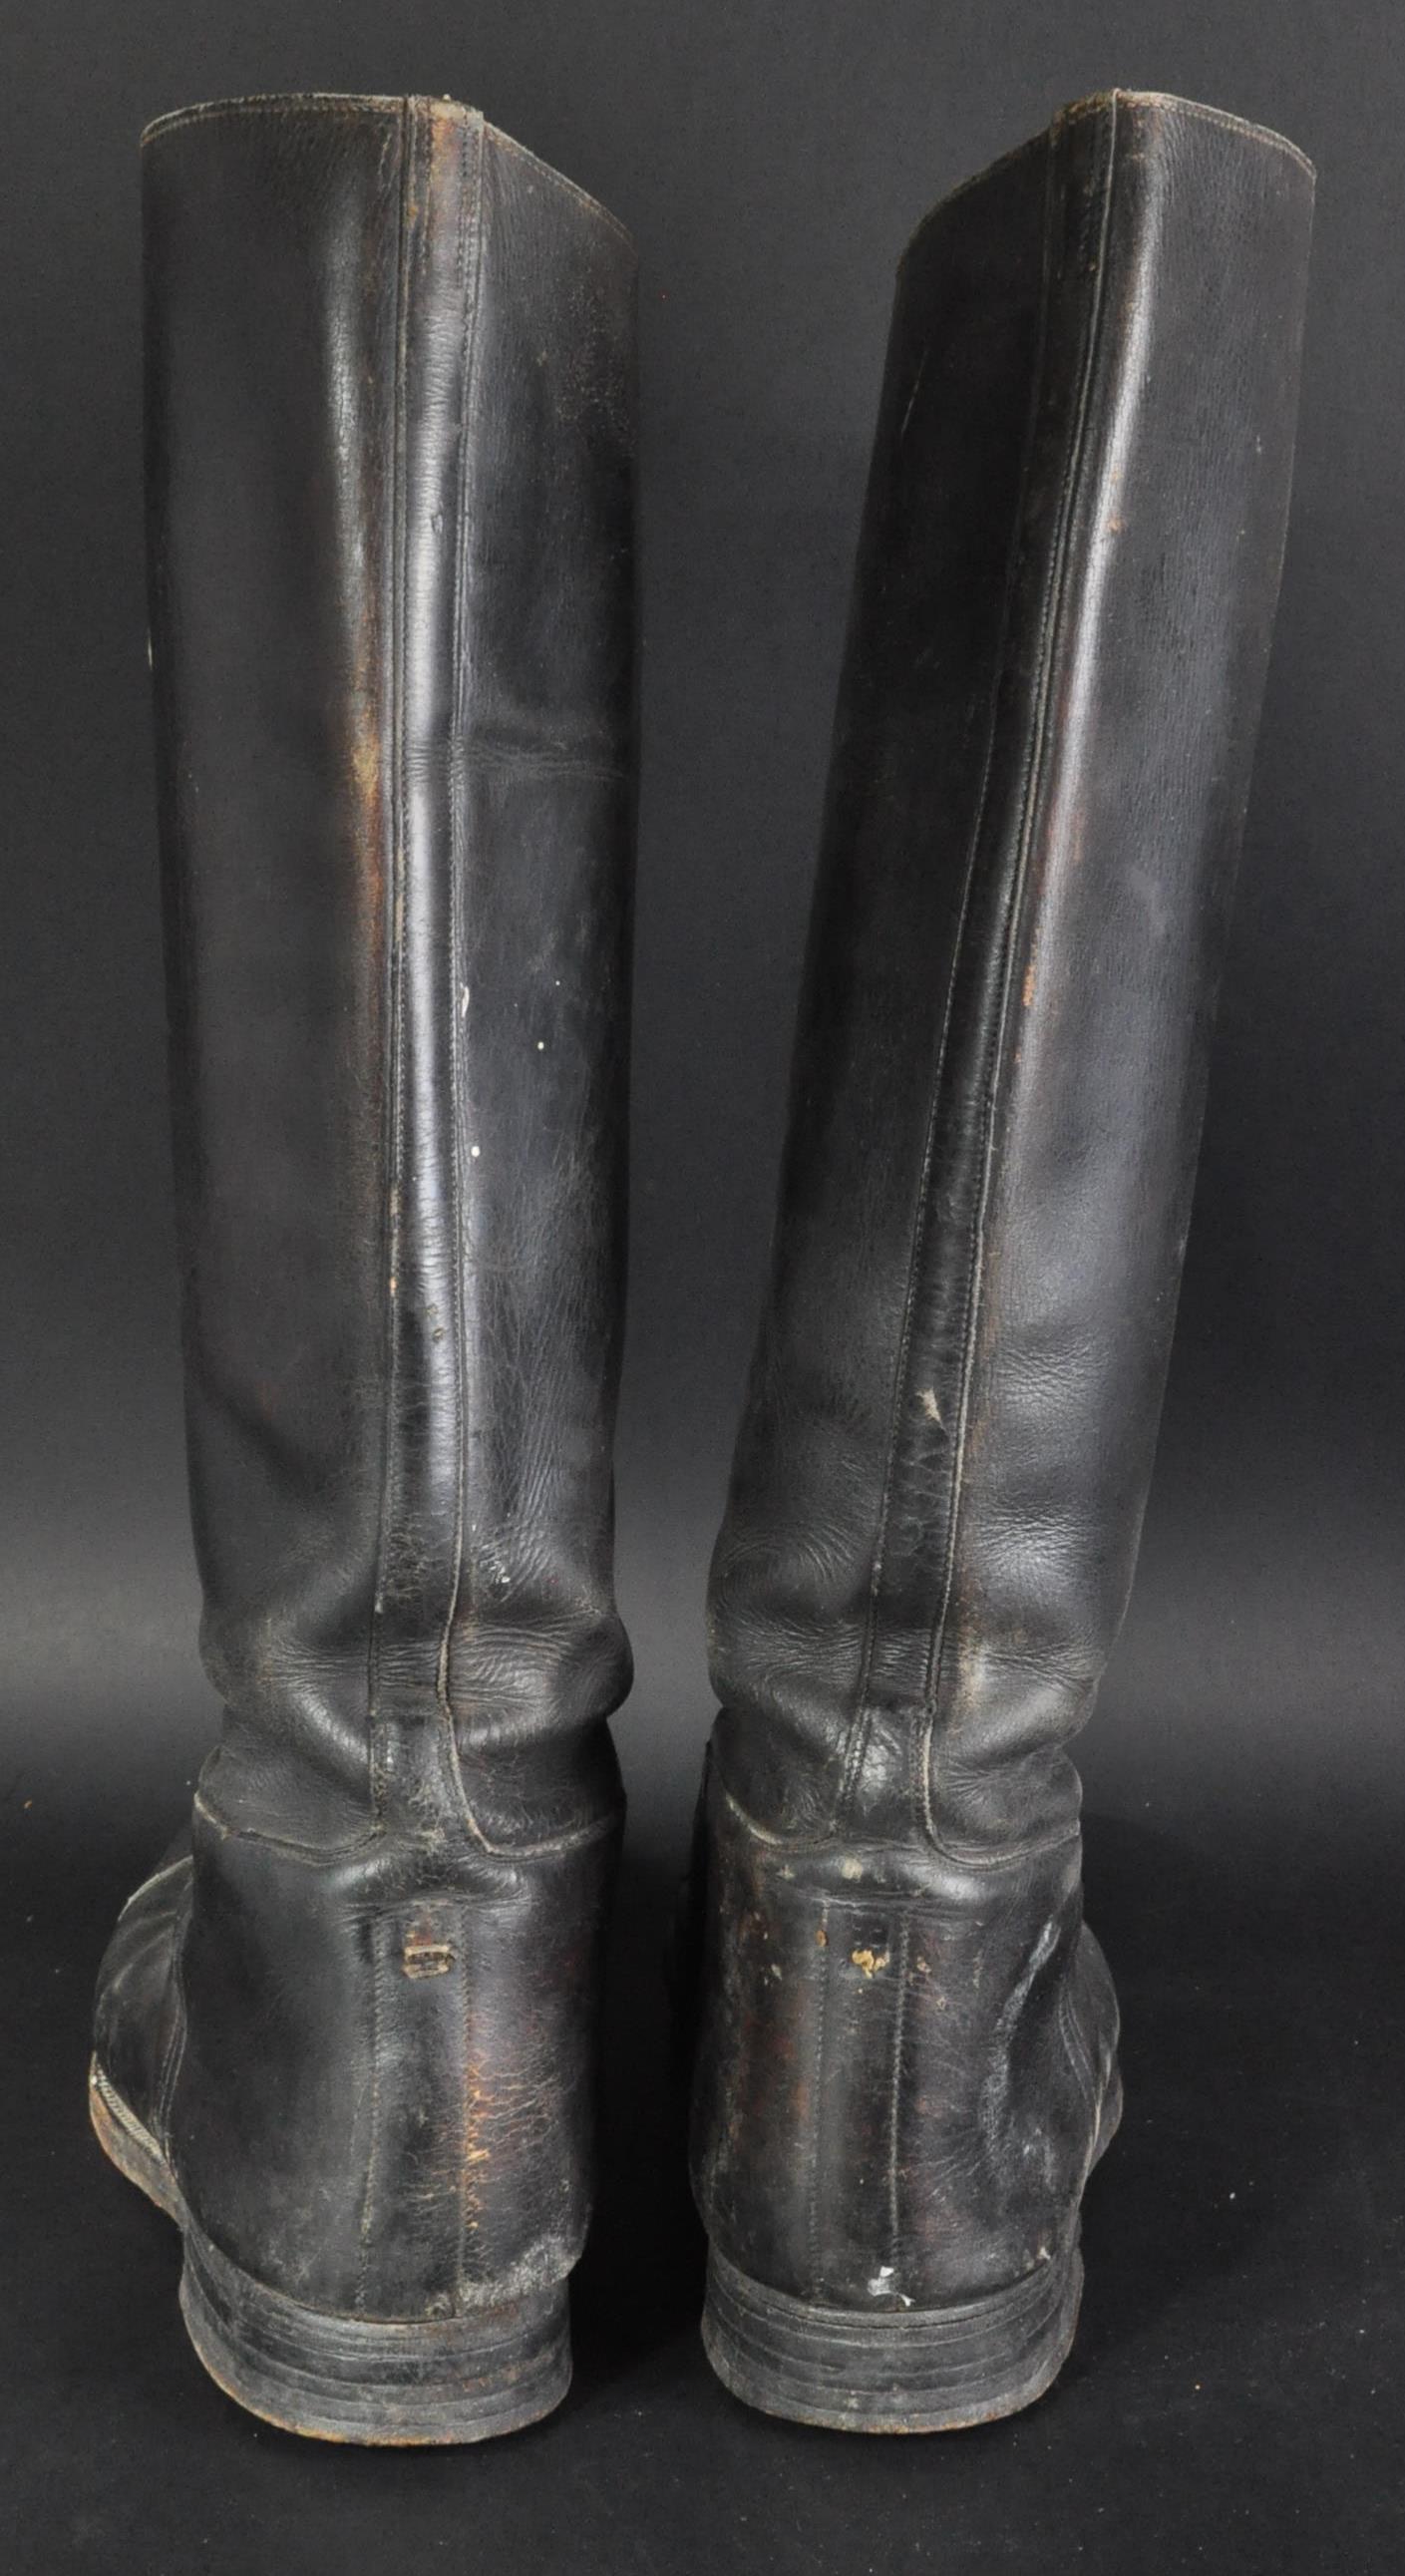 WWI FIRST WORLD WAR INTEREST - ROYAL FLYING CORPS BOOTS - Image 5 of 6